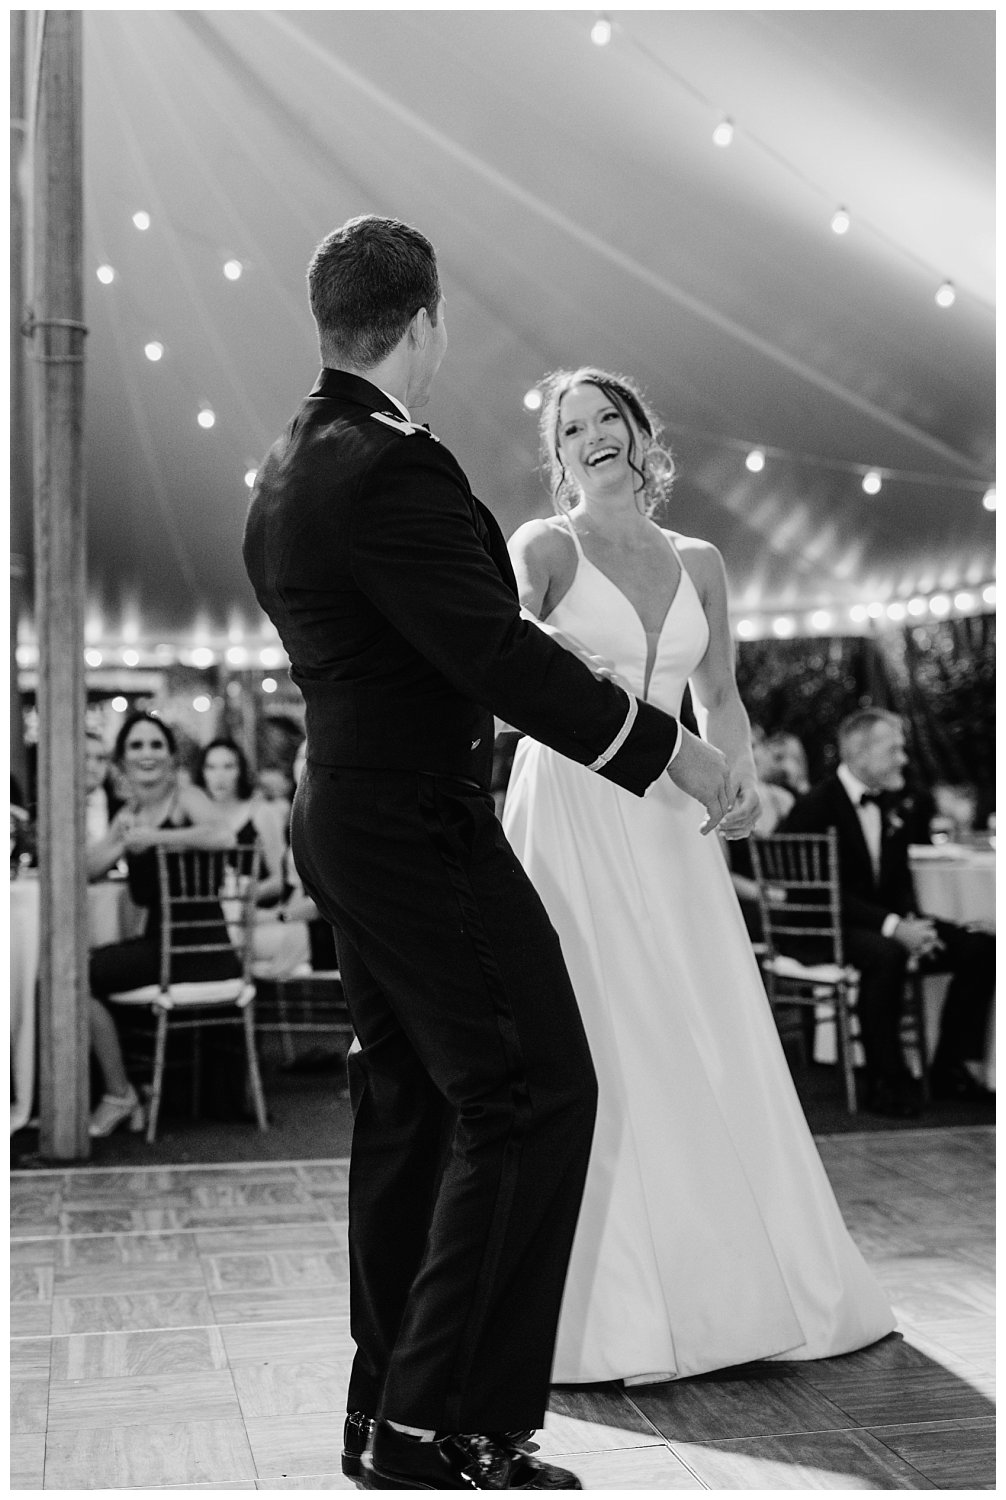 Bride and Groom first dance at Keswick Vineyard wedding photographed by Heather Dodge Photography